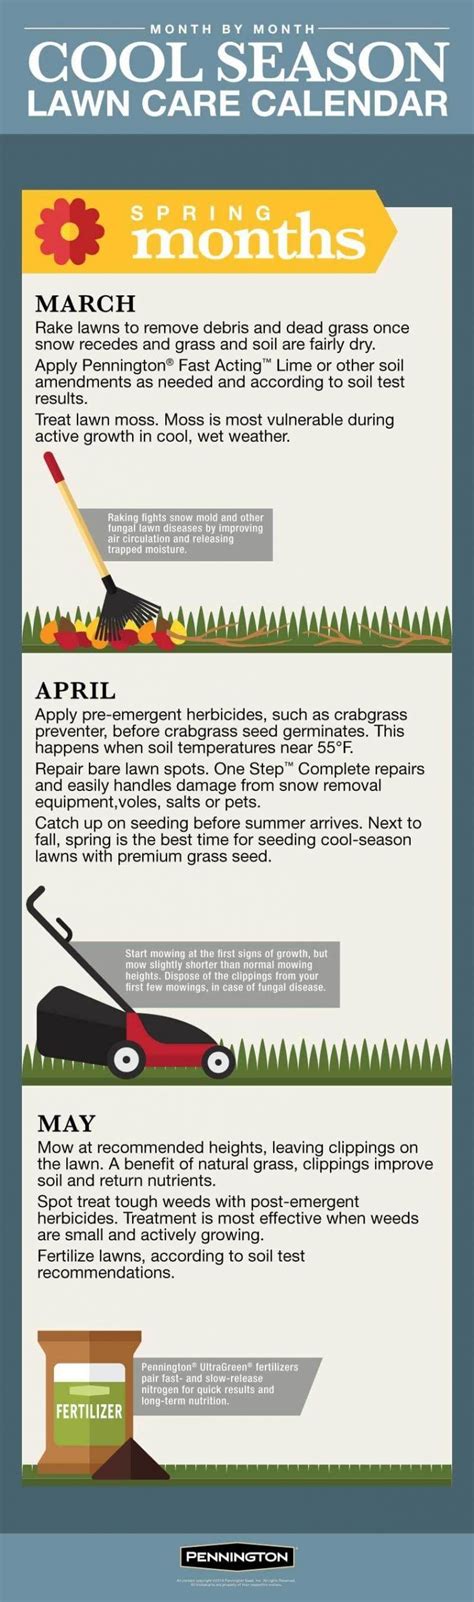 Lawn Care Calendar For Cool Season Lawns Infographic In 2020 Care